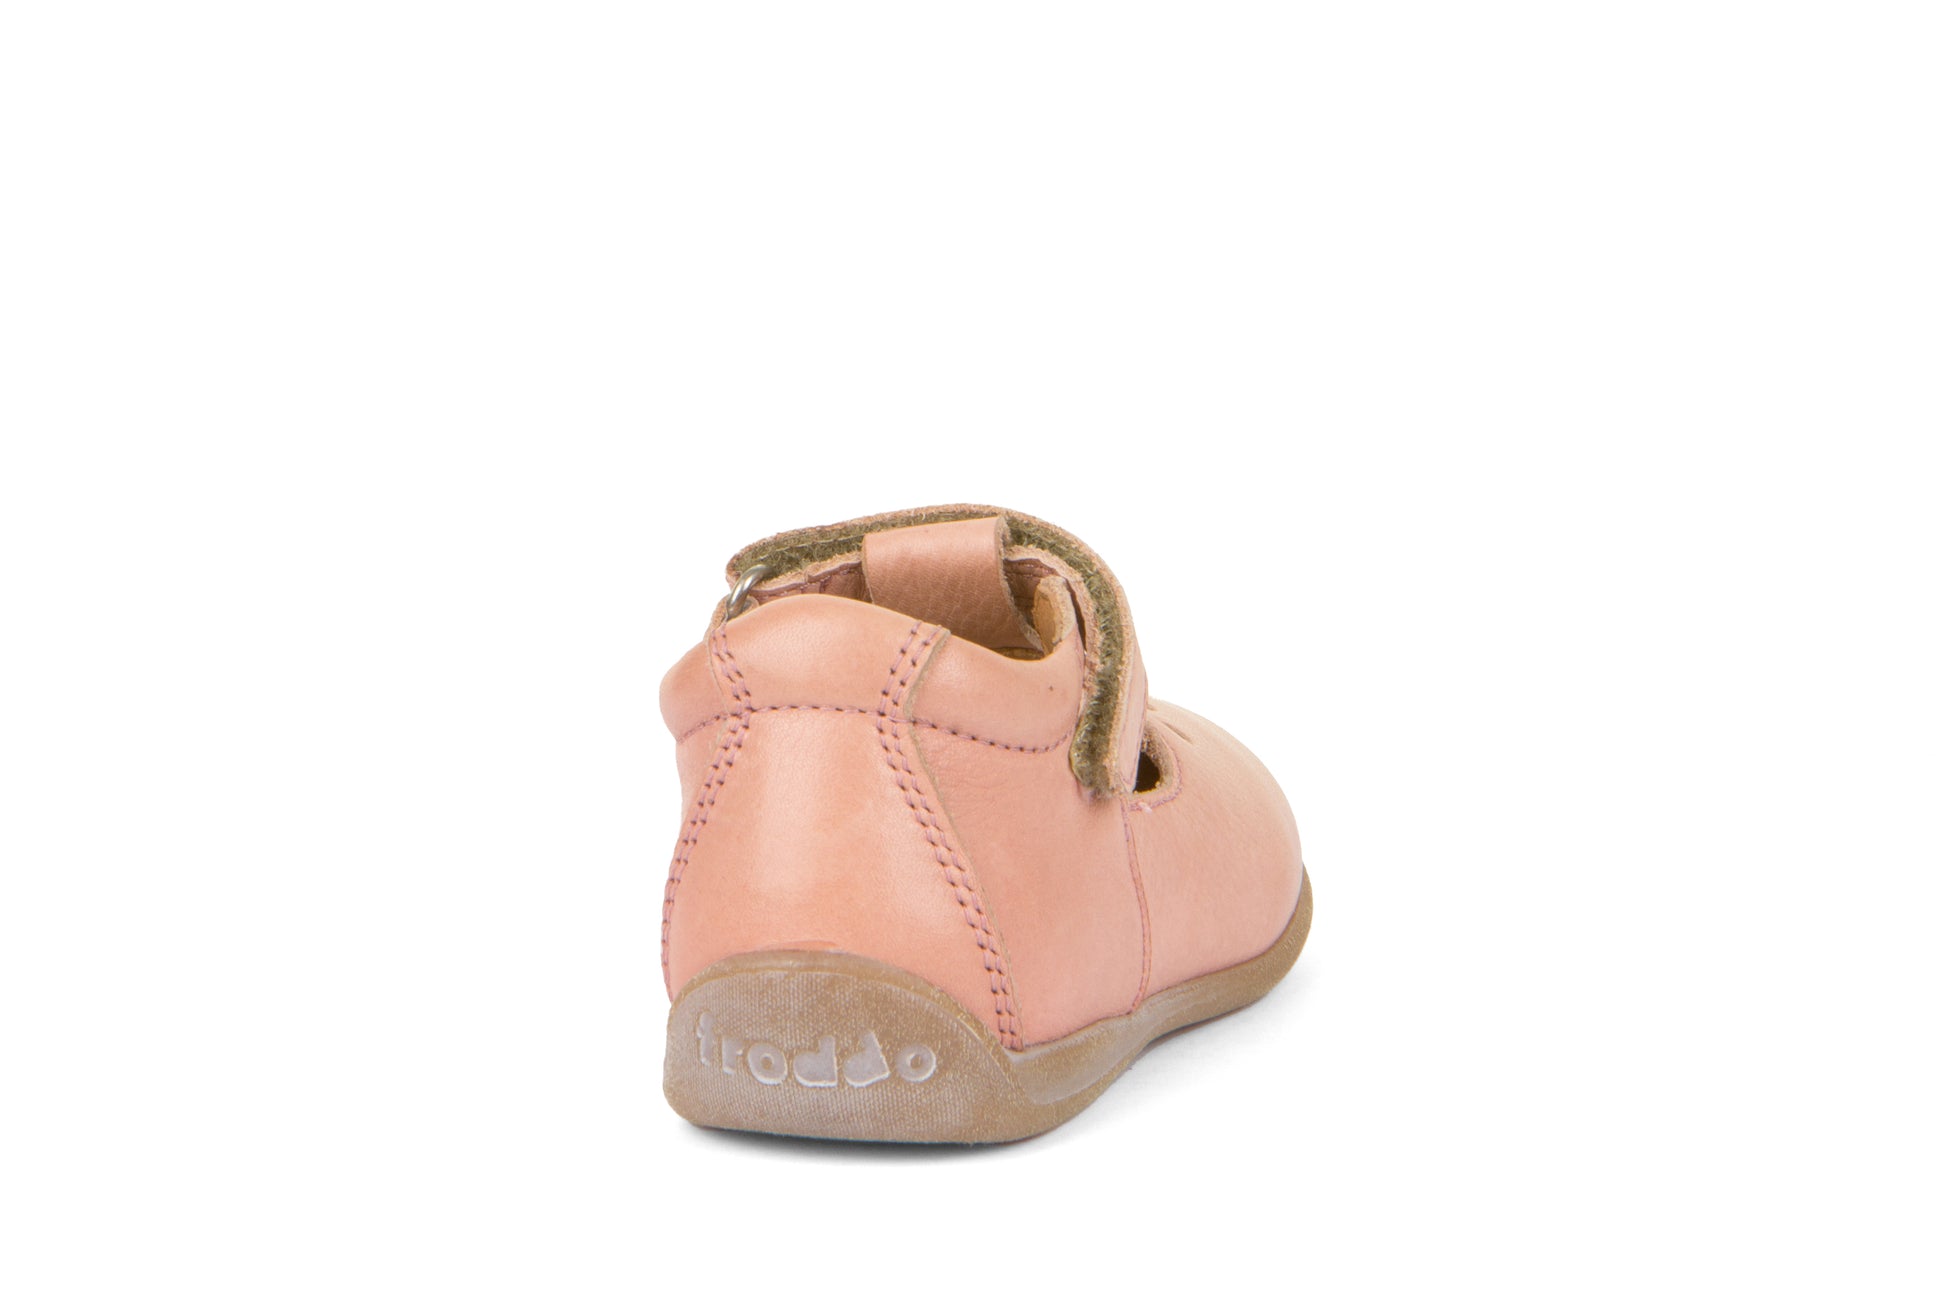 A girls shoe by Froddo, style G2140060-2 Gigi T-bar, in nude wtith teardrop cut out design. Back view.